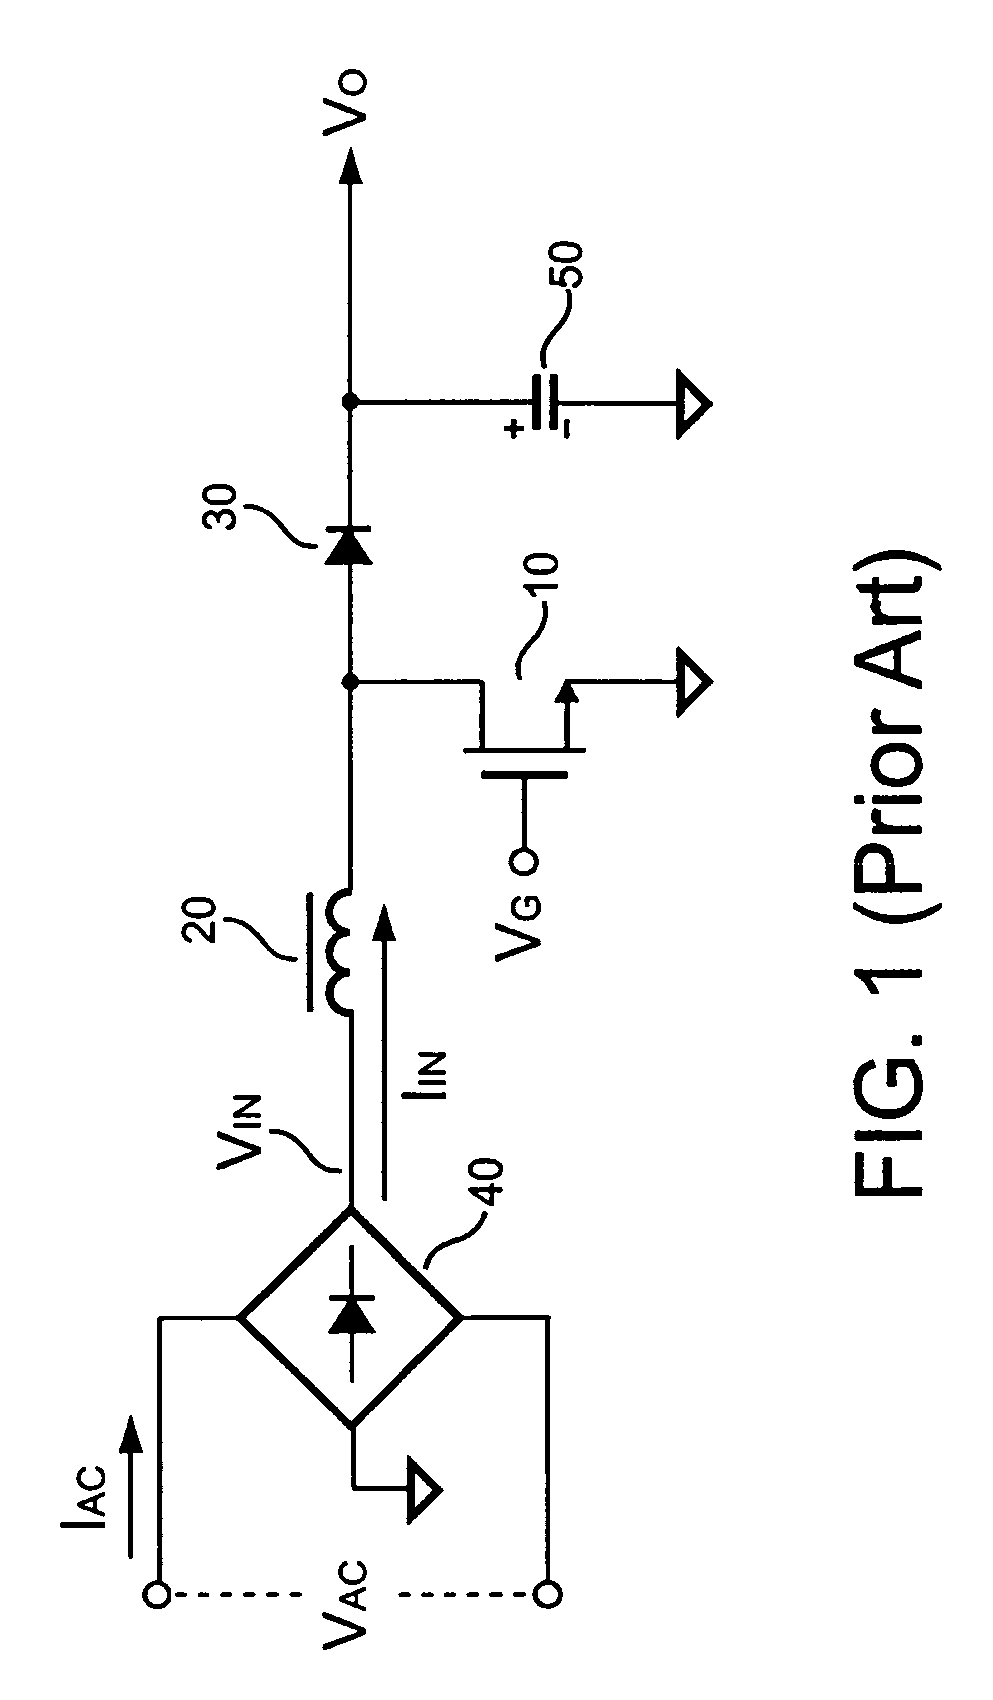 Switching control circuit for discontinuous mode PFC converters